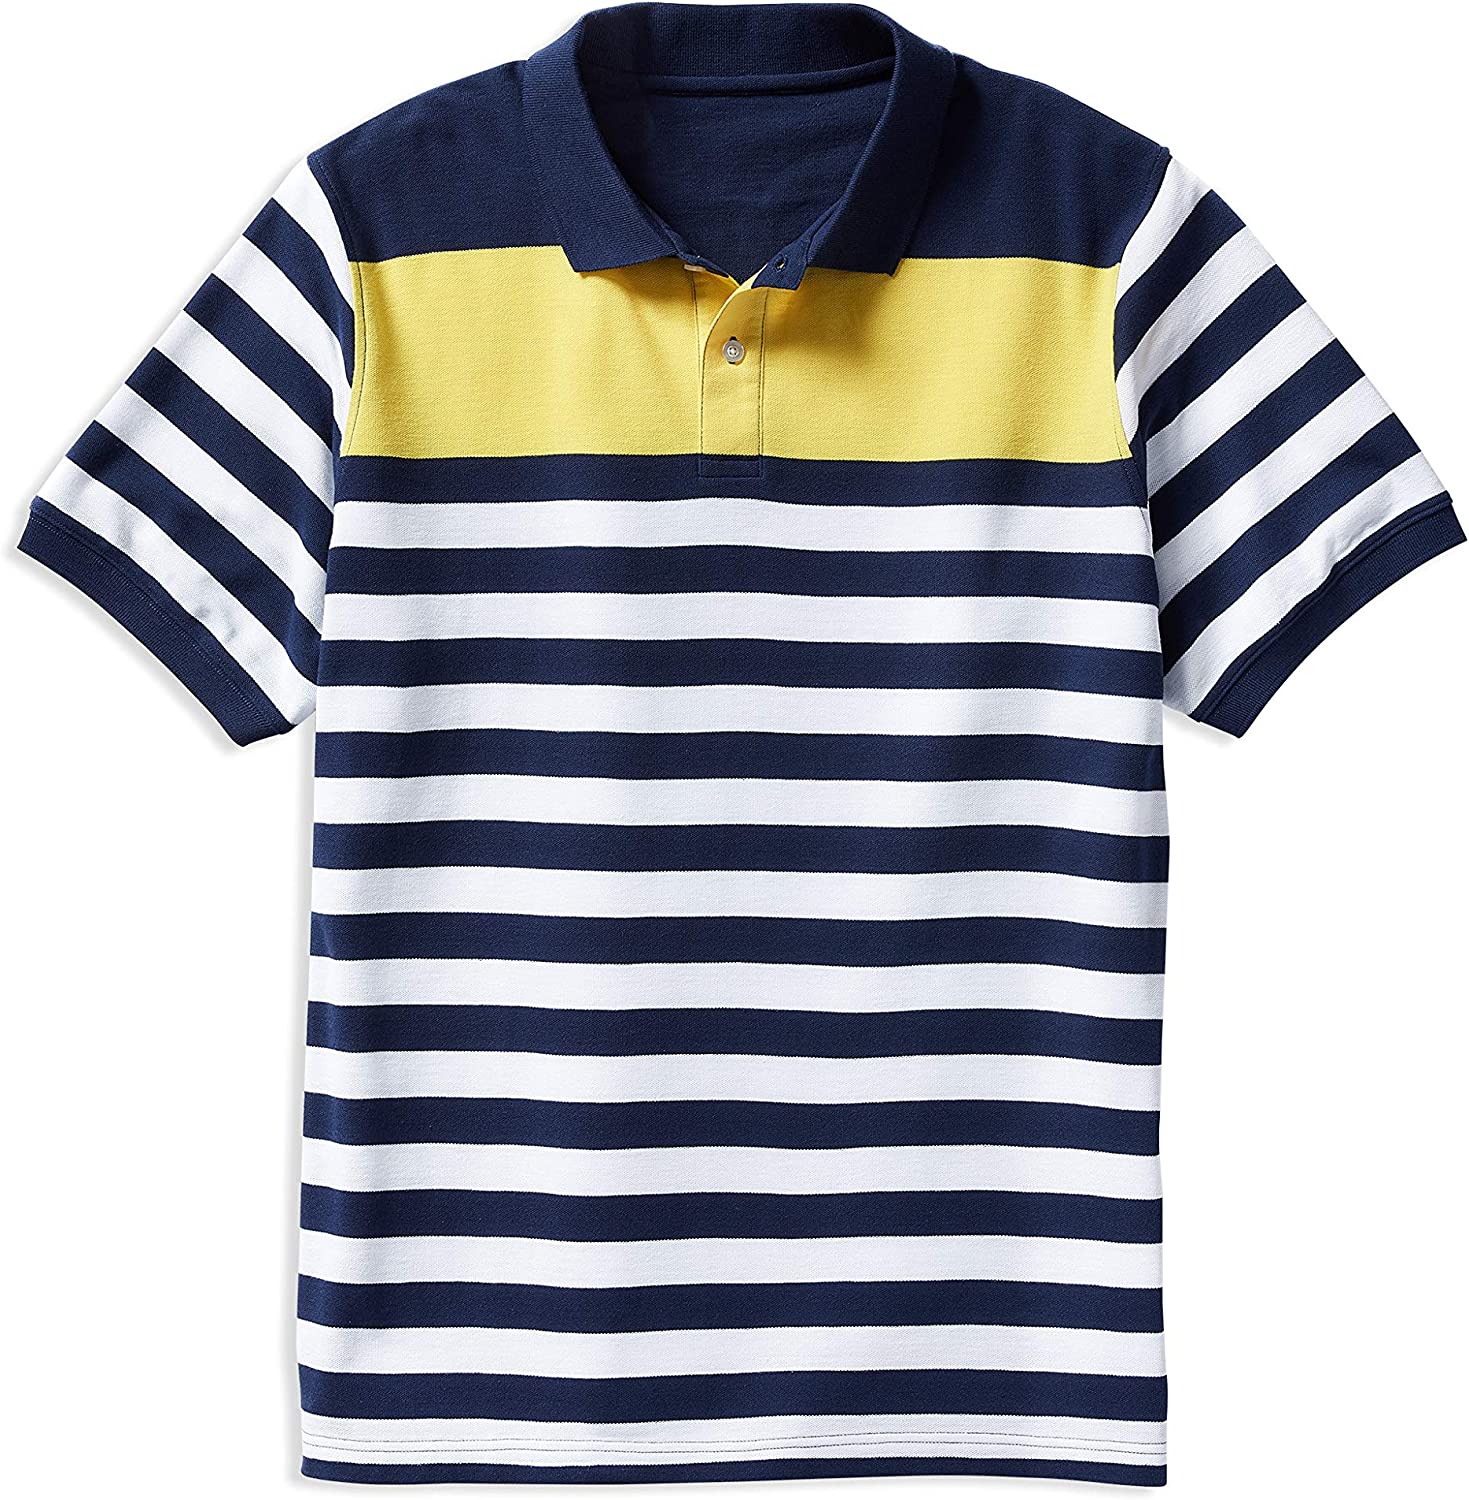 Harbor Bay by DXL Men's Big and Tall Stripe Polo Shirt, Blue/Yellow/Multi,  3XLTALL 